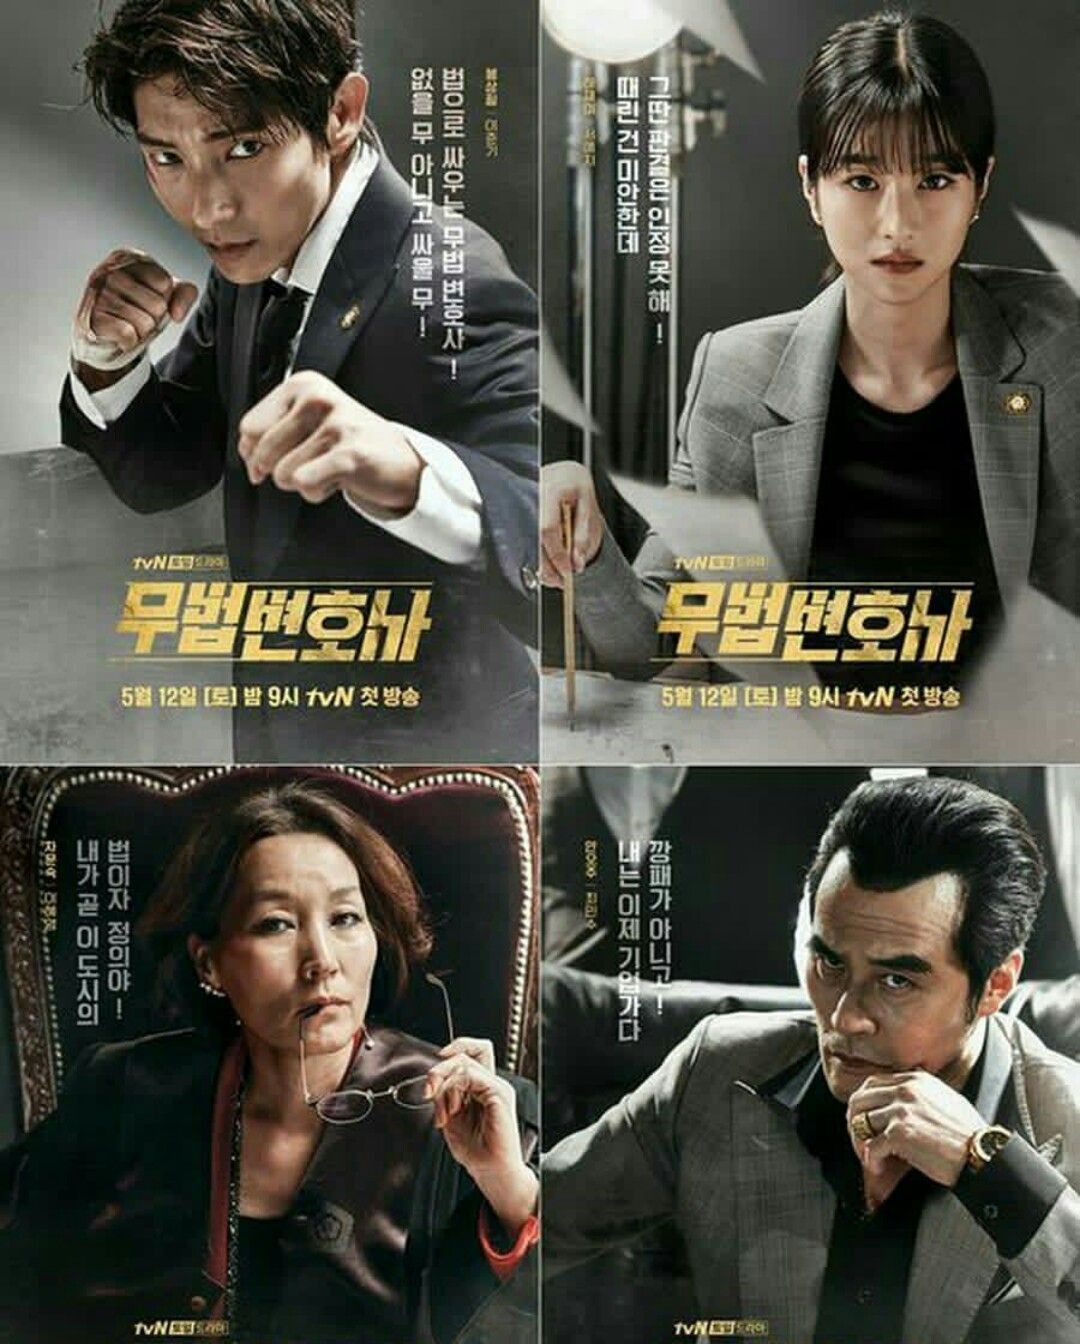 Lawless Lawyer and all a pretty good drama. A revenge drama with some humor. Had a really great cast! M. *Kdrama. Best dramas, Lee joon, Drama